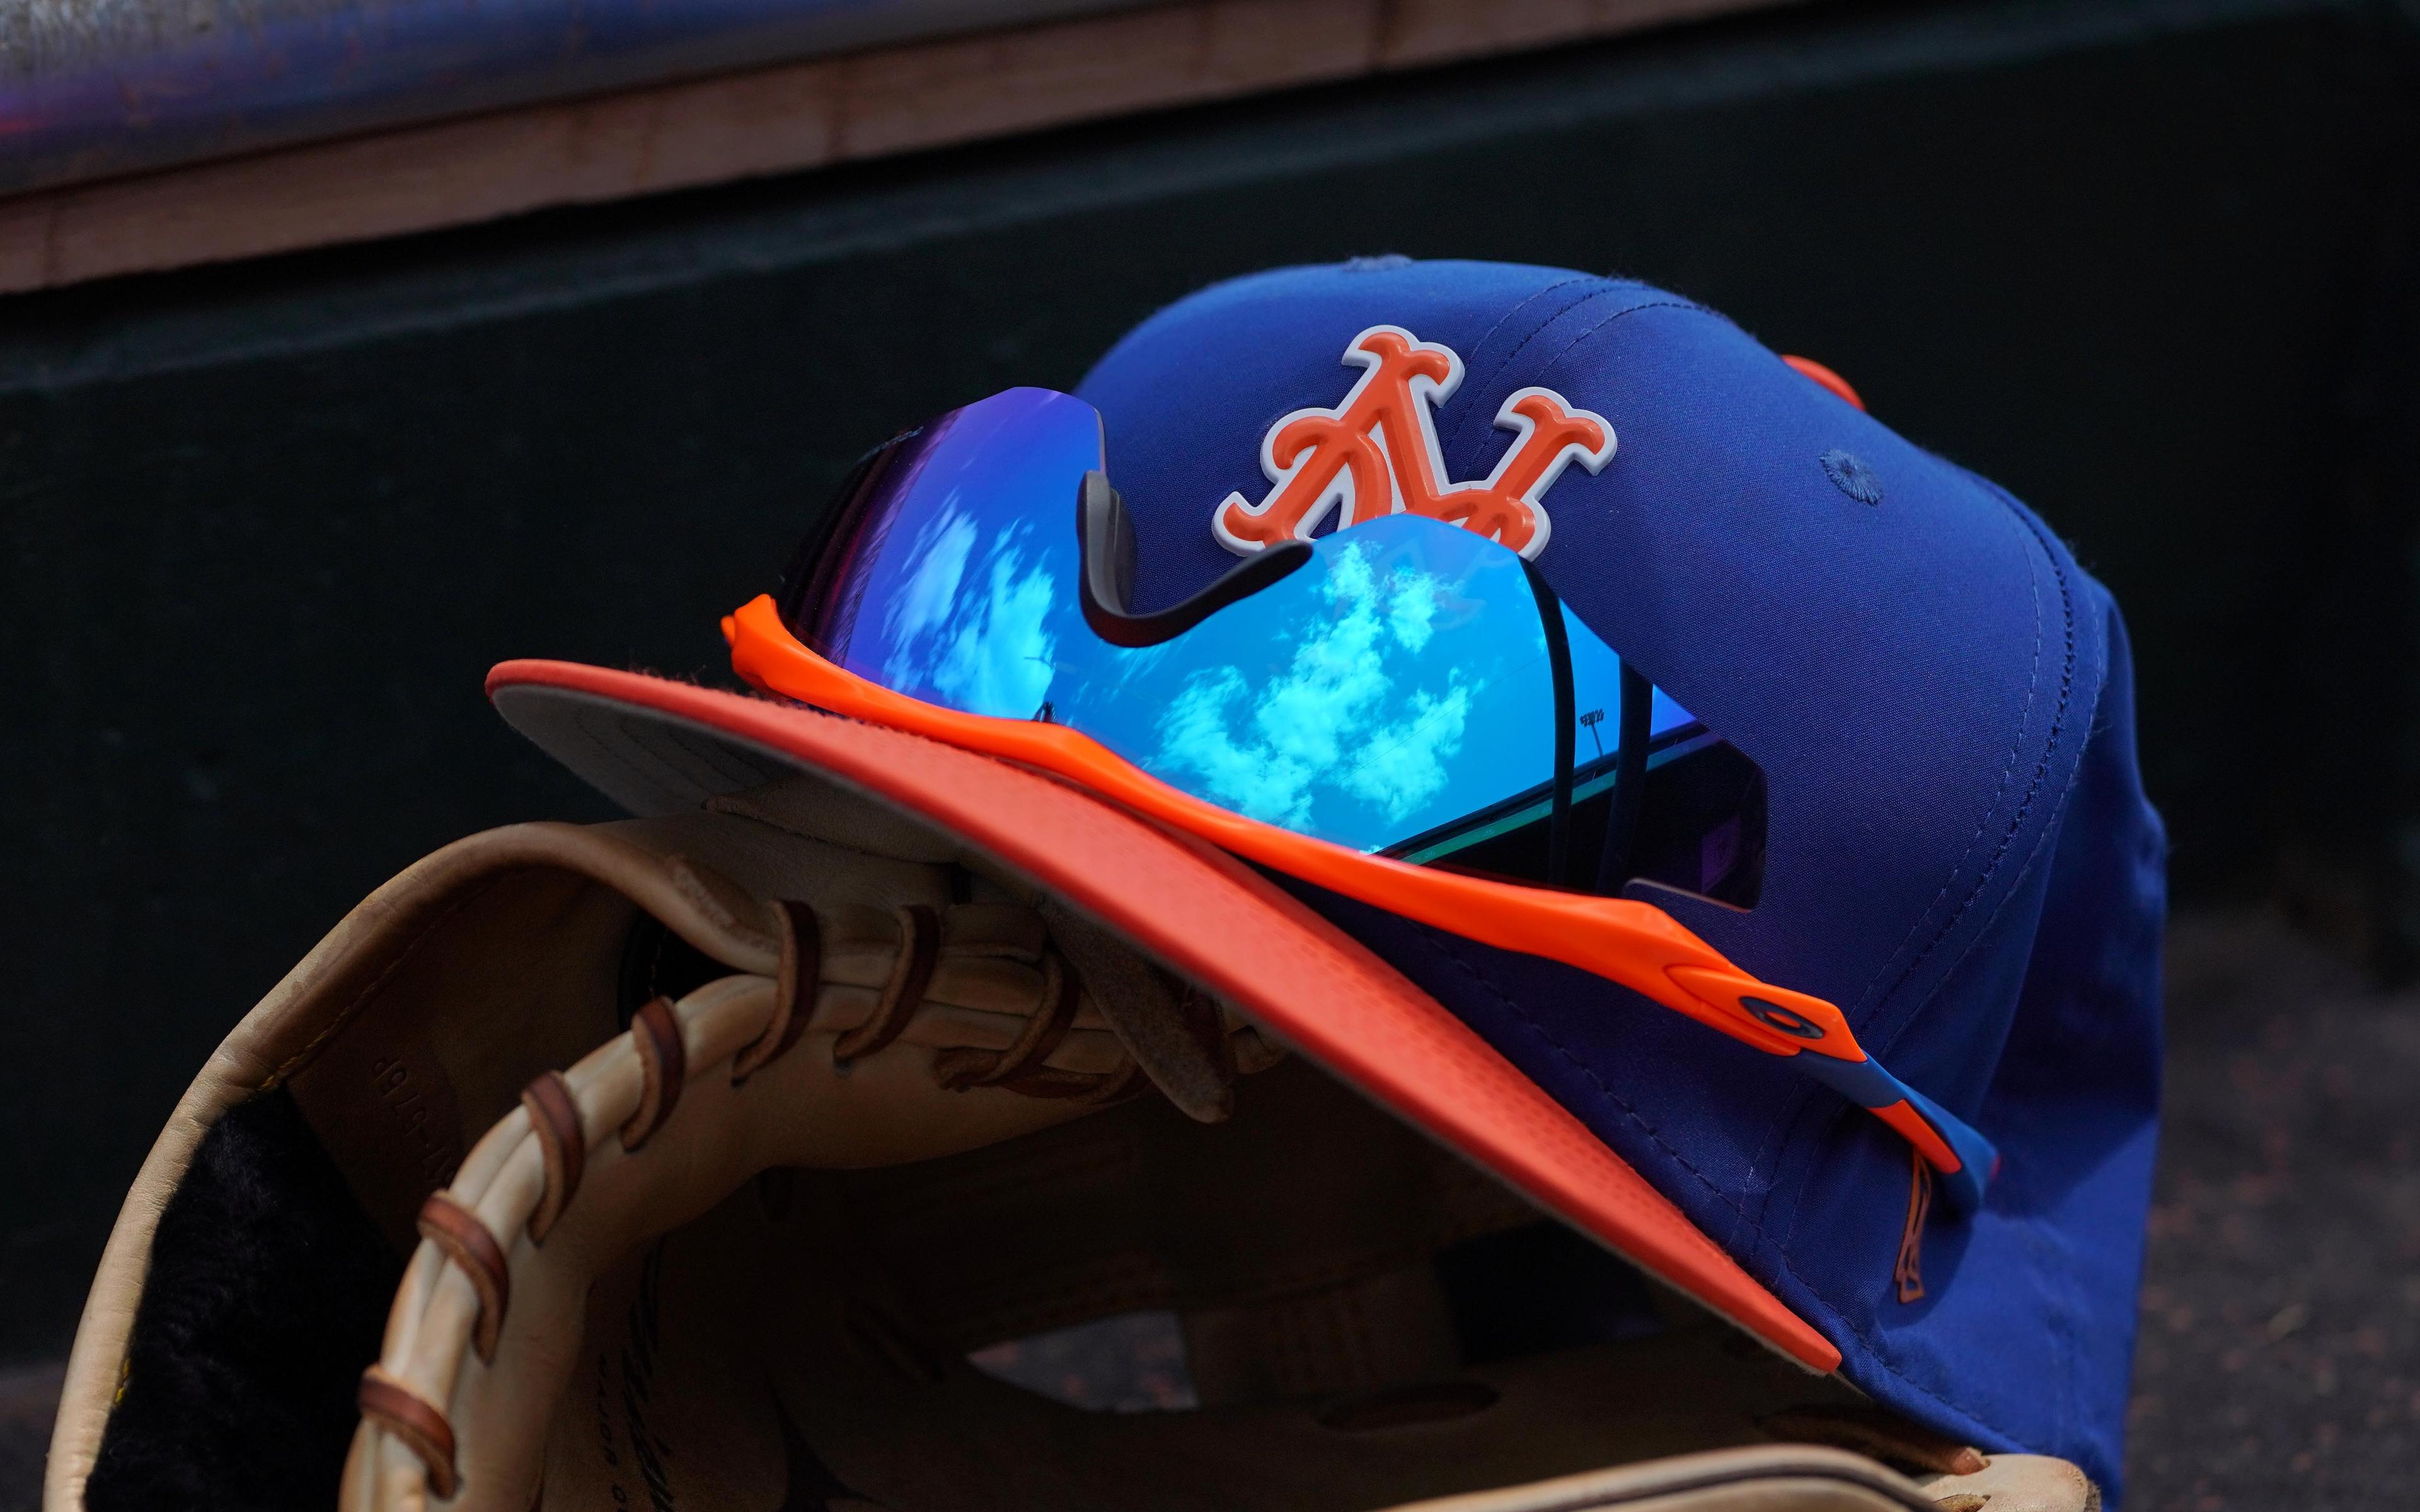 Mar 24, 2018; Jupiter, FL, USA; A New York Mets hat with sunglasses sits on a glove in the dugout during a spring training game between the St. Louis Cardinals and the New York Mets at Roger Dean Stadium. Mandatory Credit: Jasen Vinlove-USA TODAY Sports / © Jasen Vinlove-USA TODAY Sports